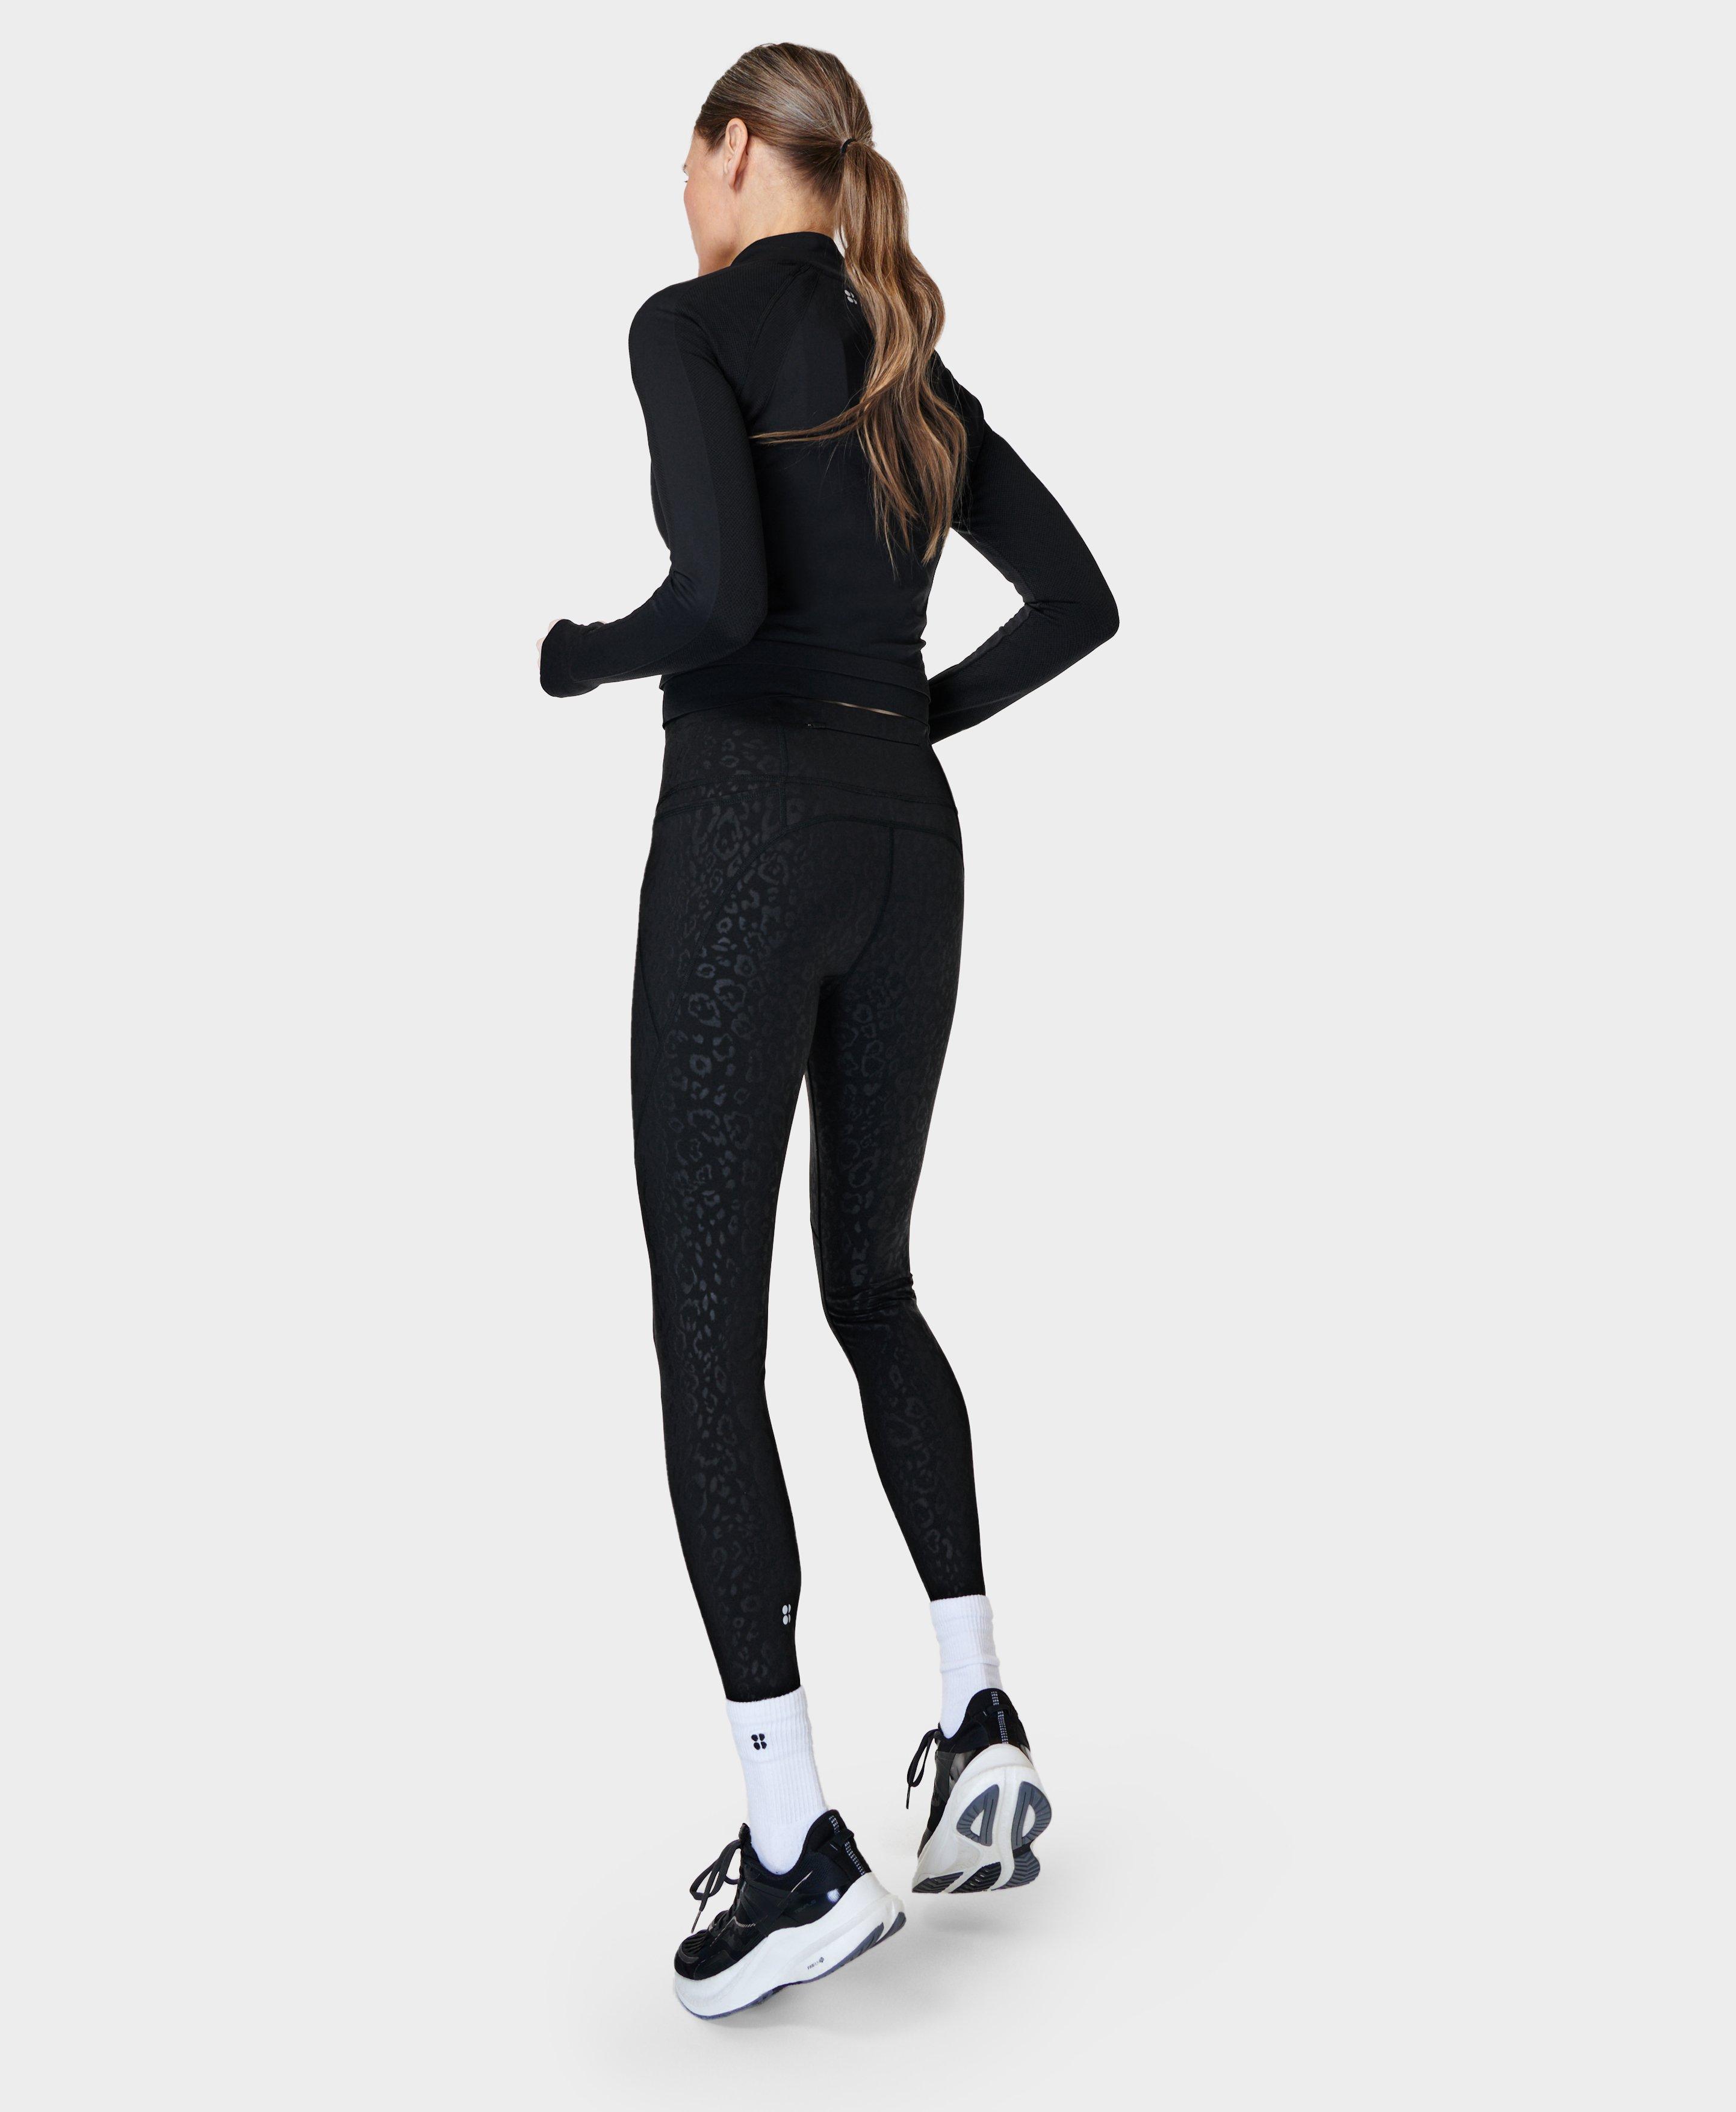 Seamless High Waist Bubble Butt Push Up Seamless Workout Leggings For Women  Sexy And Slimming Fitness Pants T231026 From Mengyang02, $3.24 | DHgate.Com